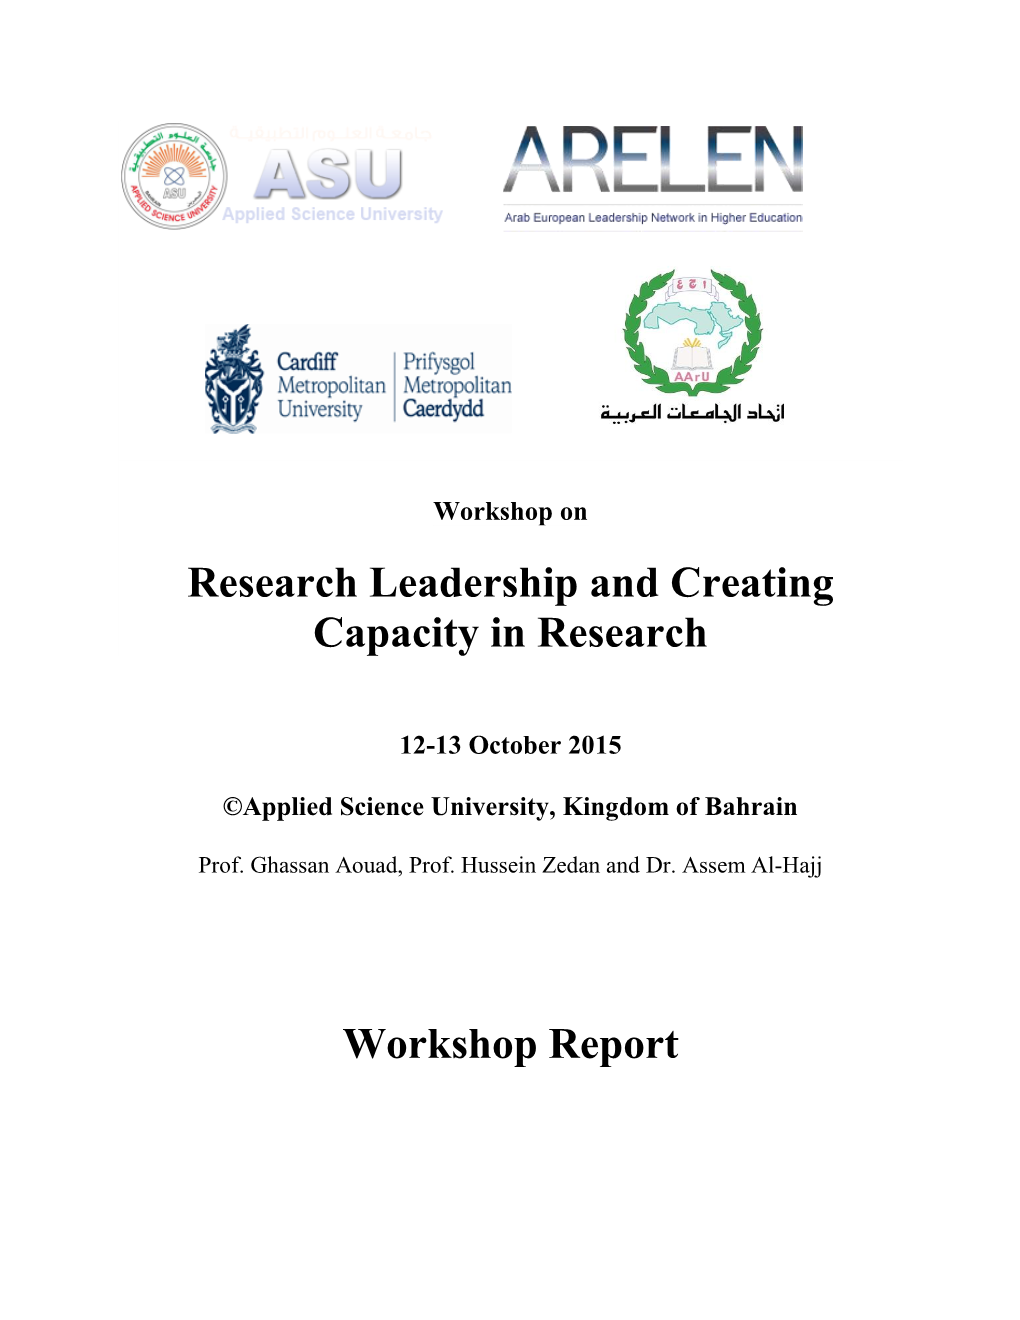 Research Leadership and Creating Capacity in Research Workshop Report